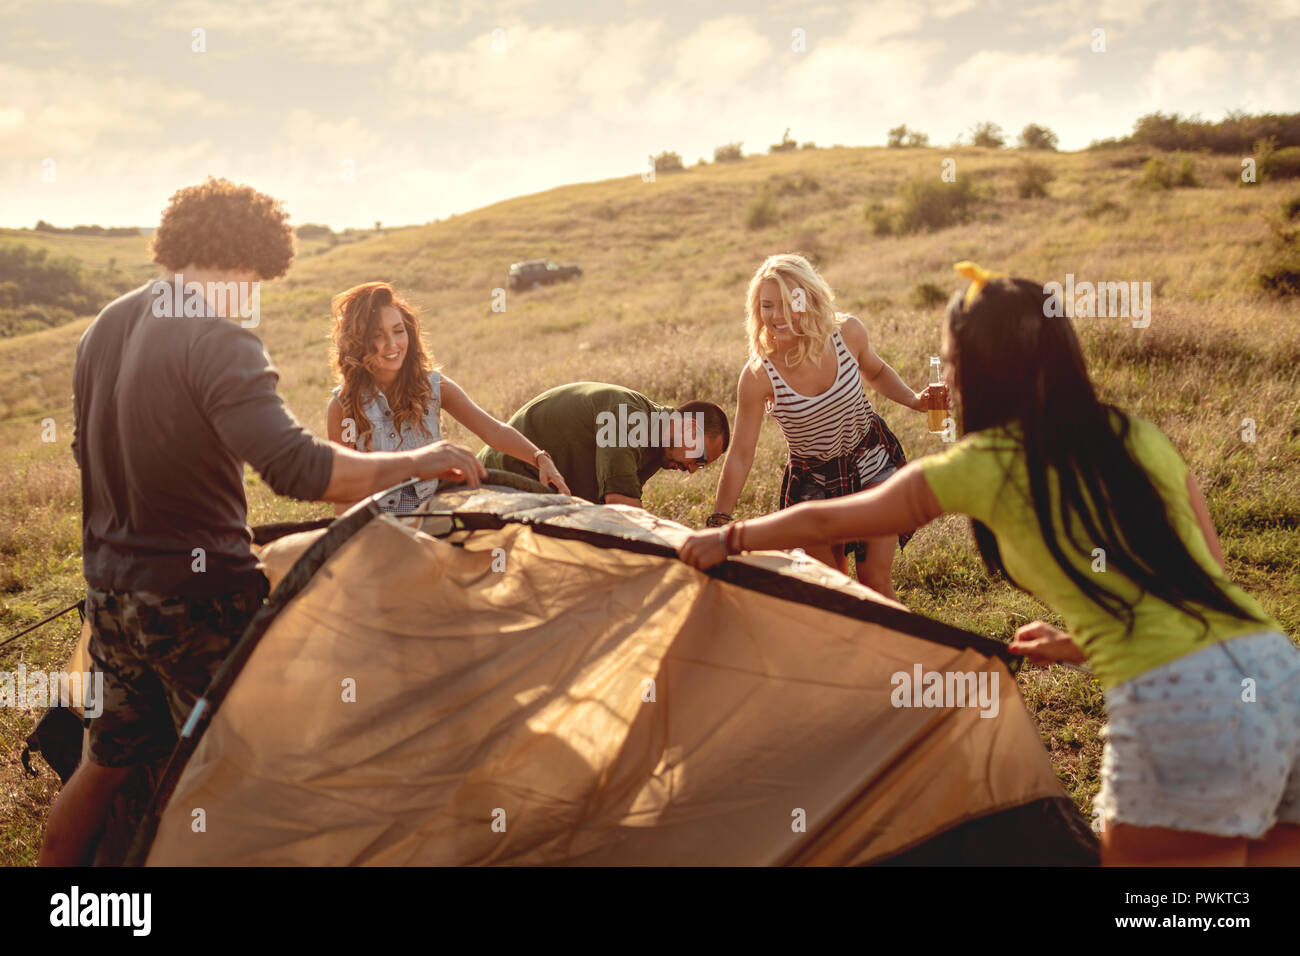 The young happy friends are preparing for camping. They're installing a tent on a suitable place in a meadow and their girlfriends are helping them. Stock Photo